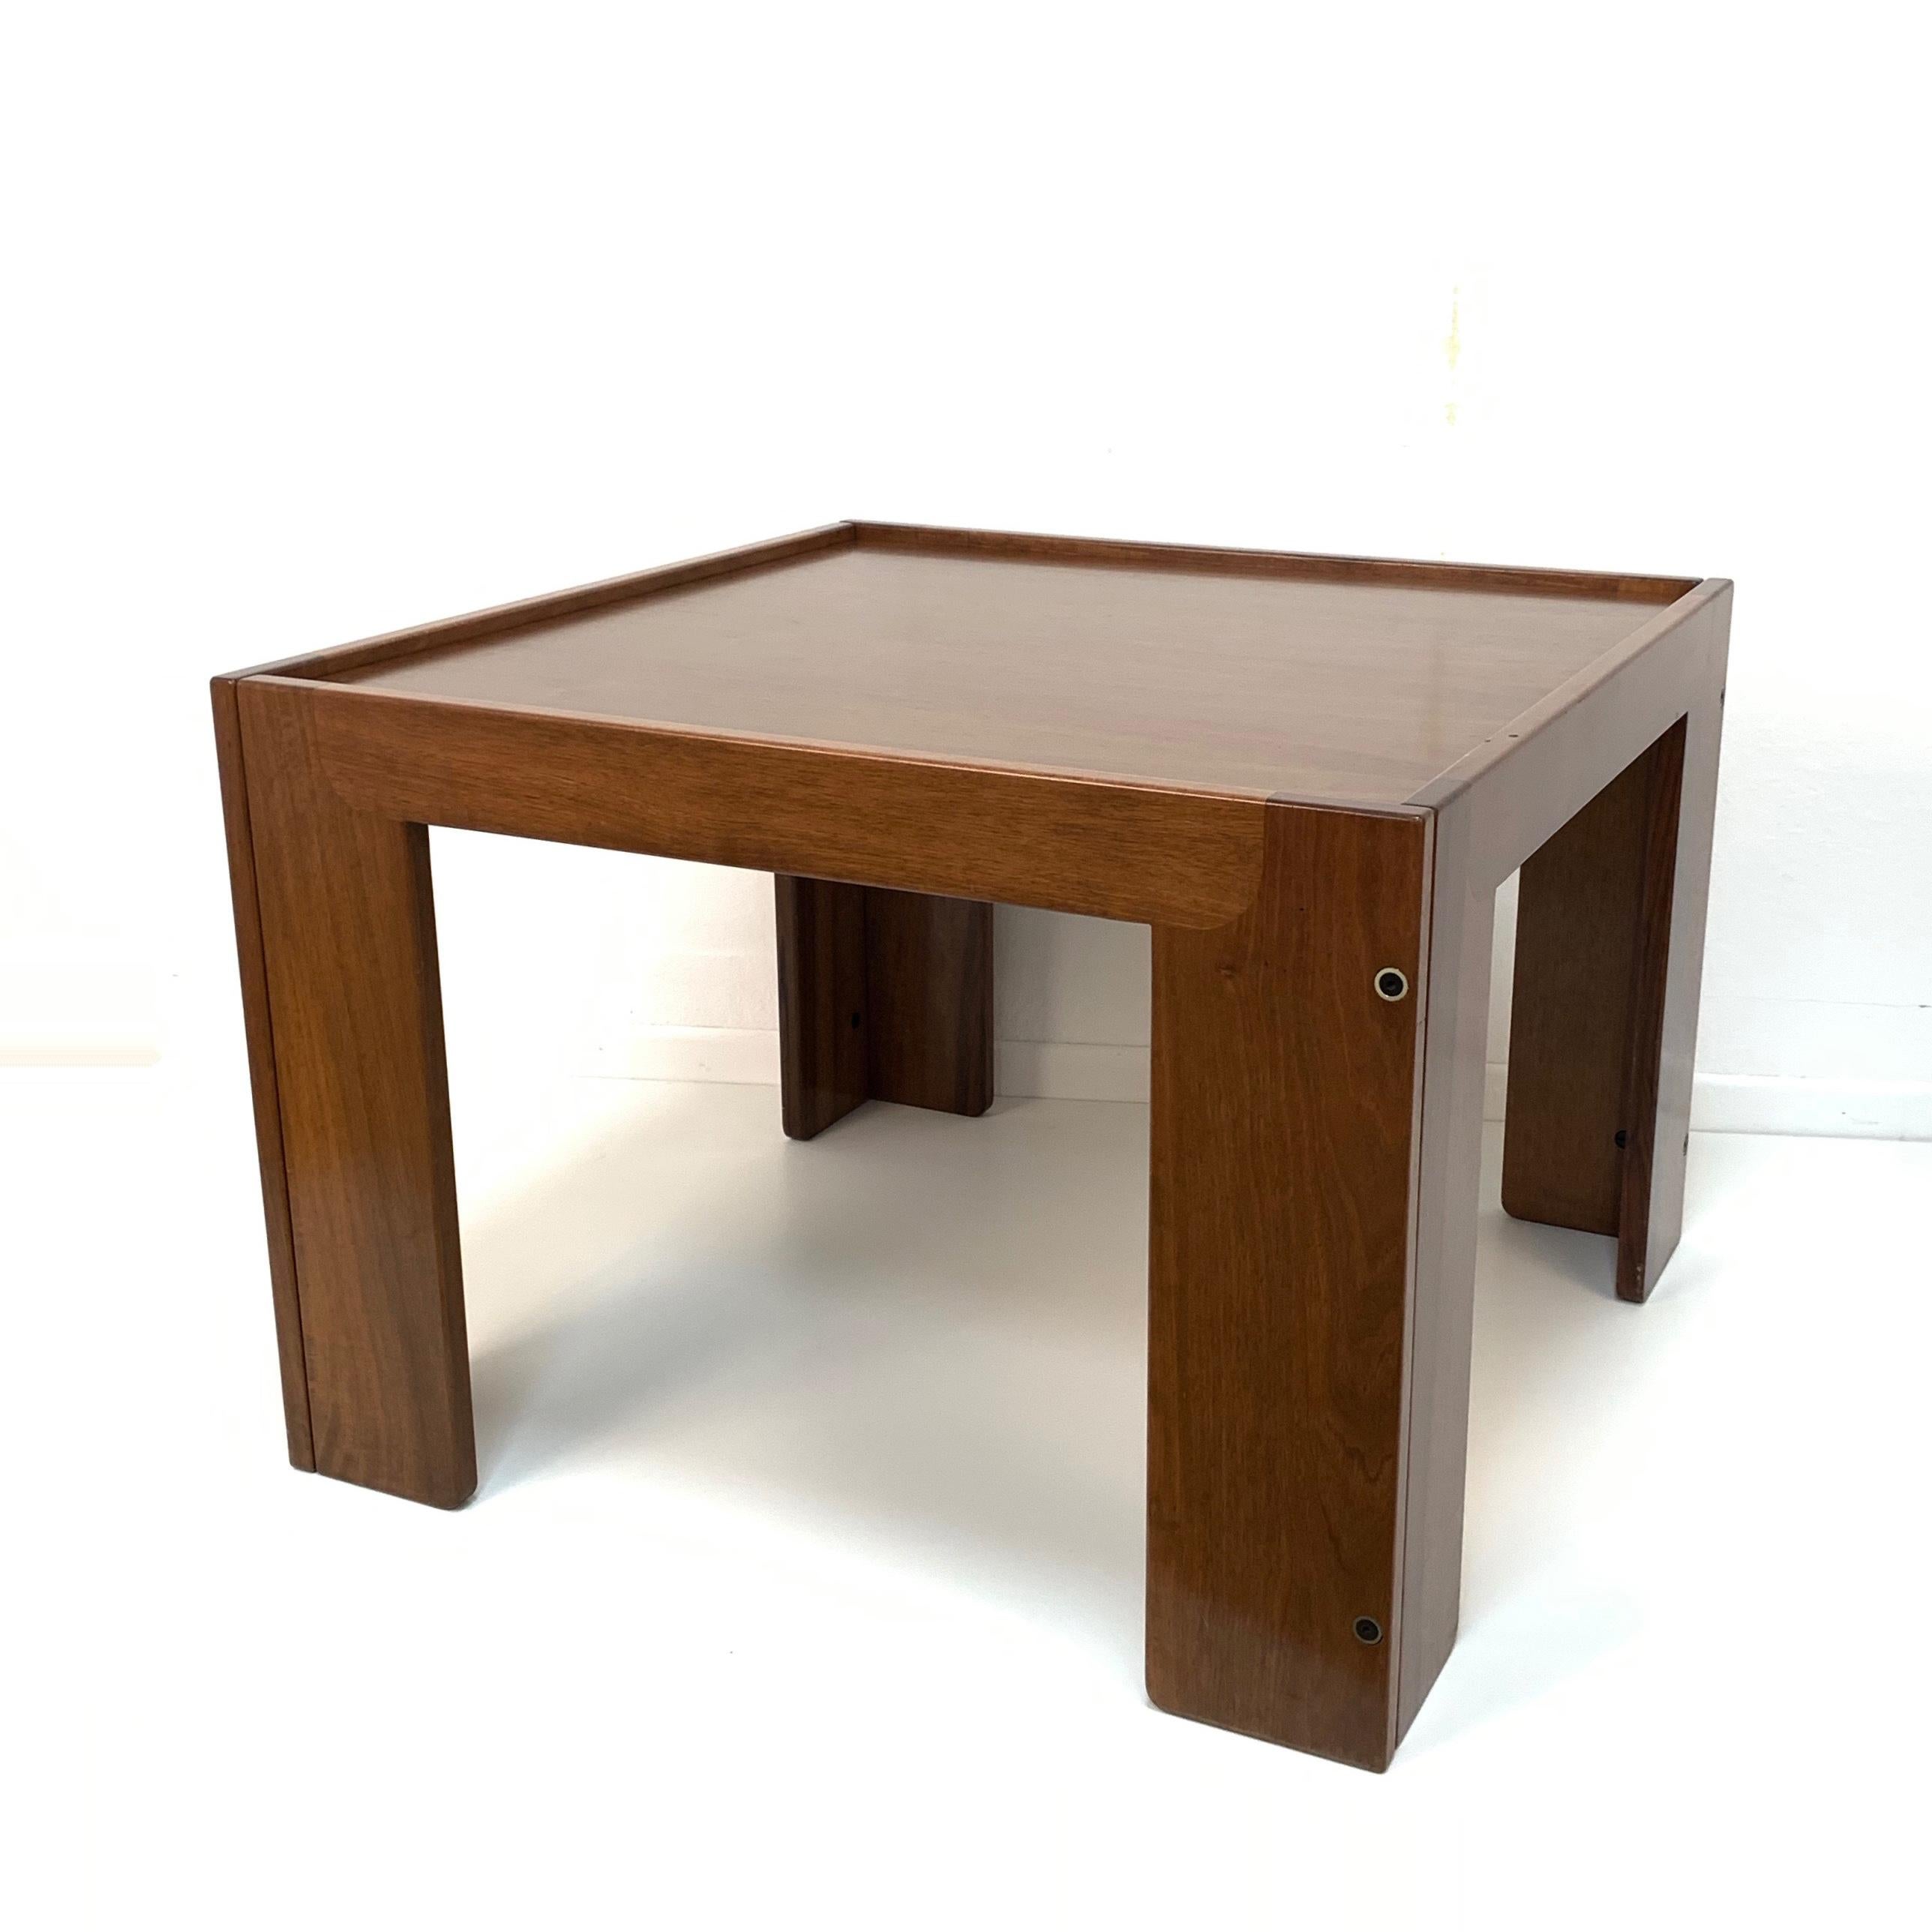 Amazing midcentury maple squared coffee table. It was produced in Italy during the 1960s by Cassina and designed by Afra and Tobia Scarpa.

This squared table (measures: cm 75 x 75 x 52) has a removable and folding maple top. It has signs of light